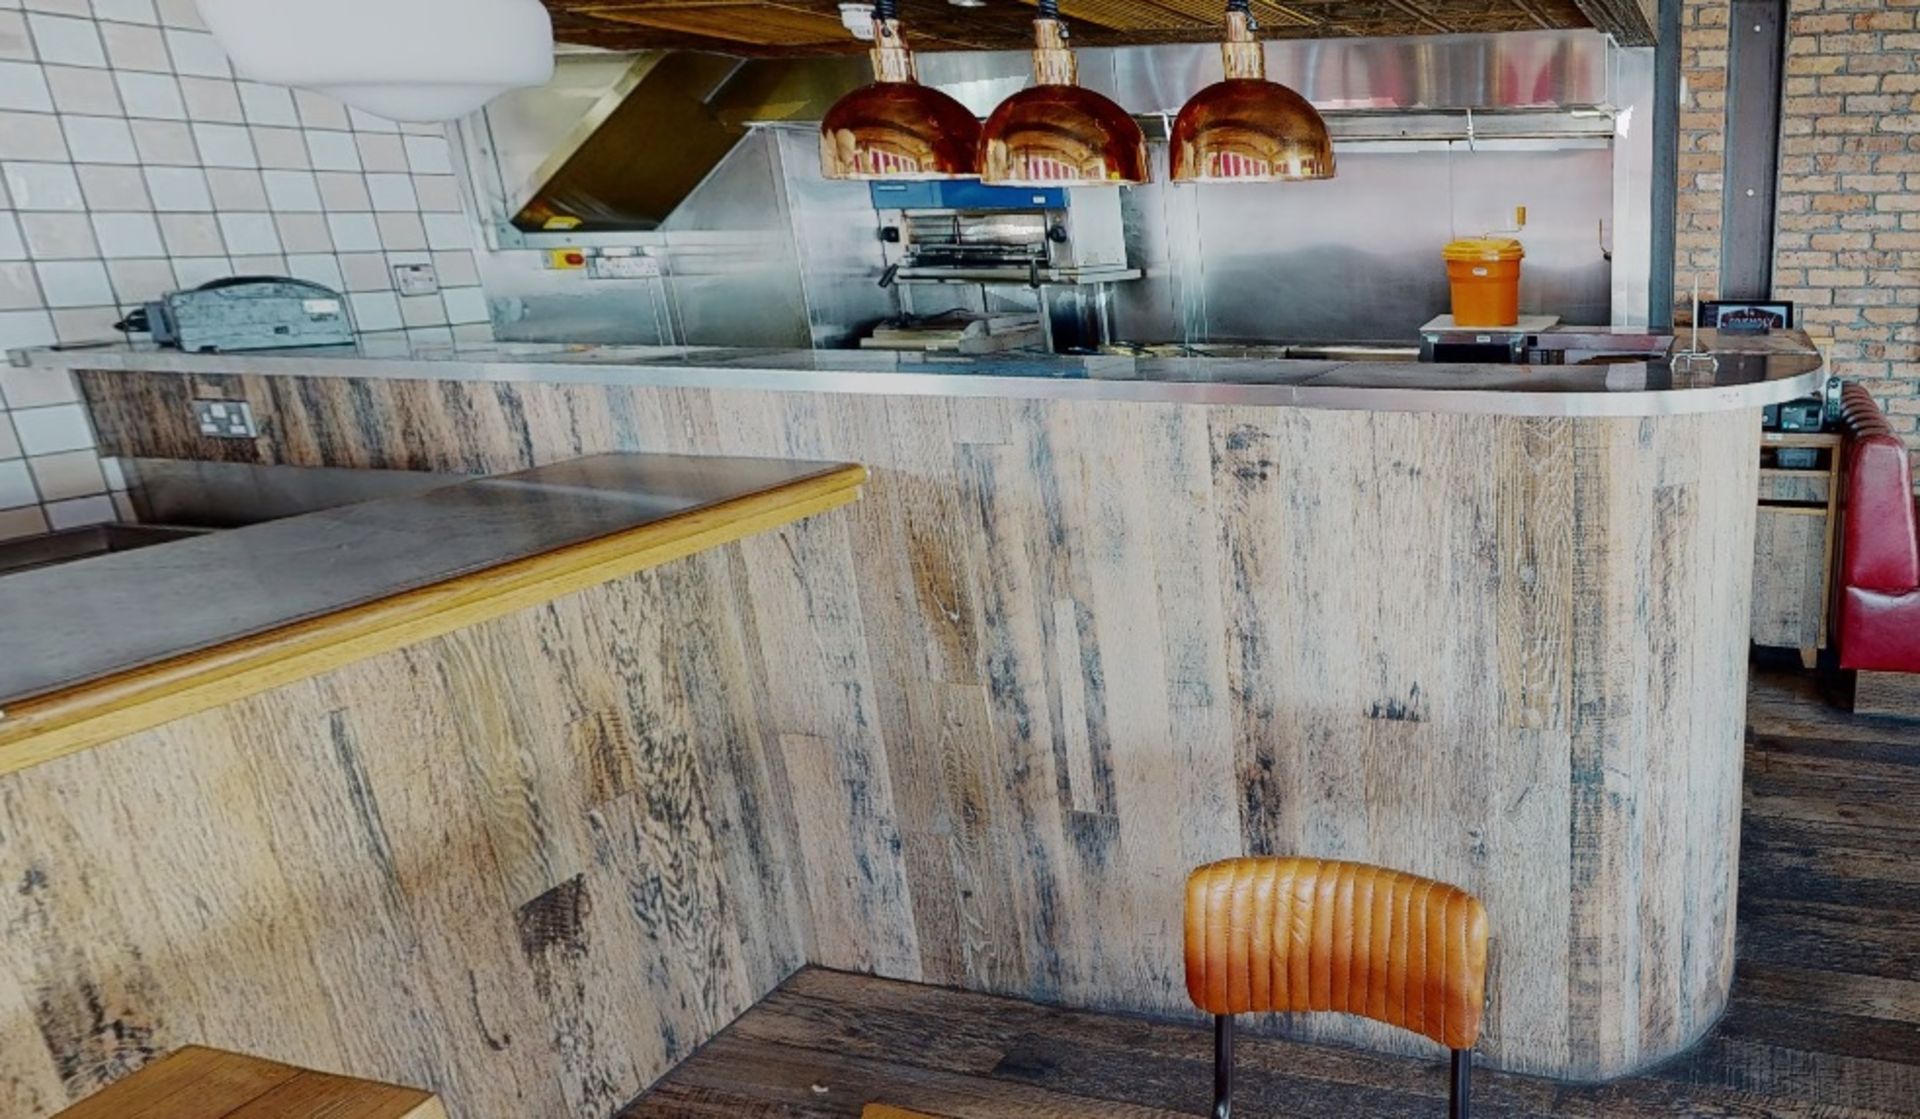 1 x Steel Topped Restaurant Pass Counter With A Pair Of Swinging Doors - Approx 3.5 Metres Wide - Image 2 of 4